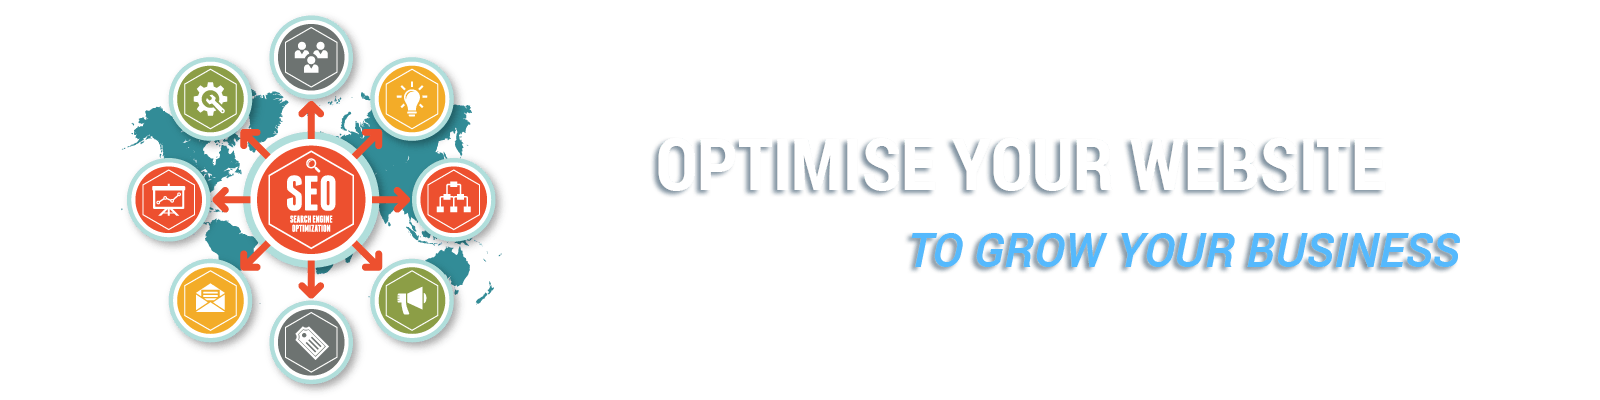 Optimise your website